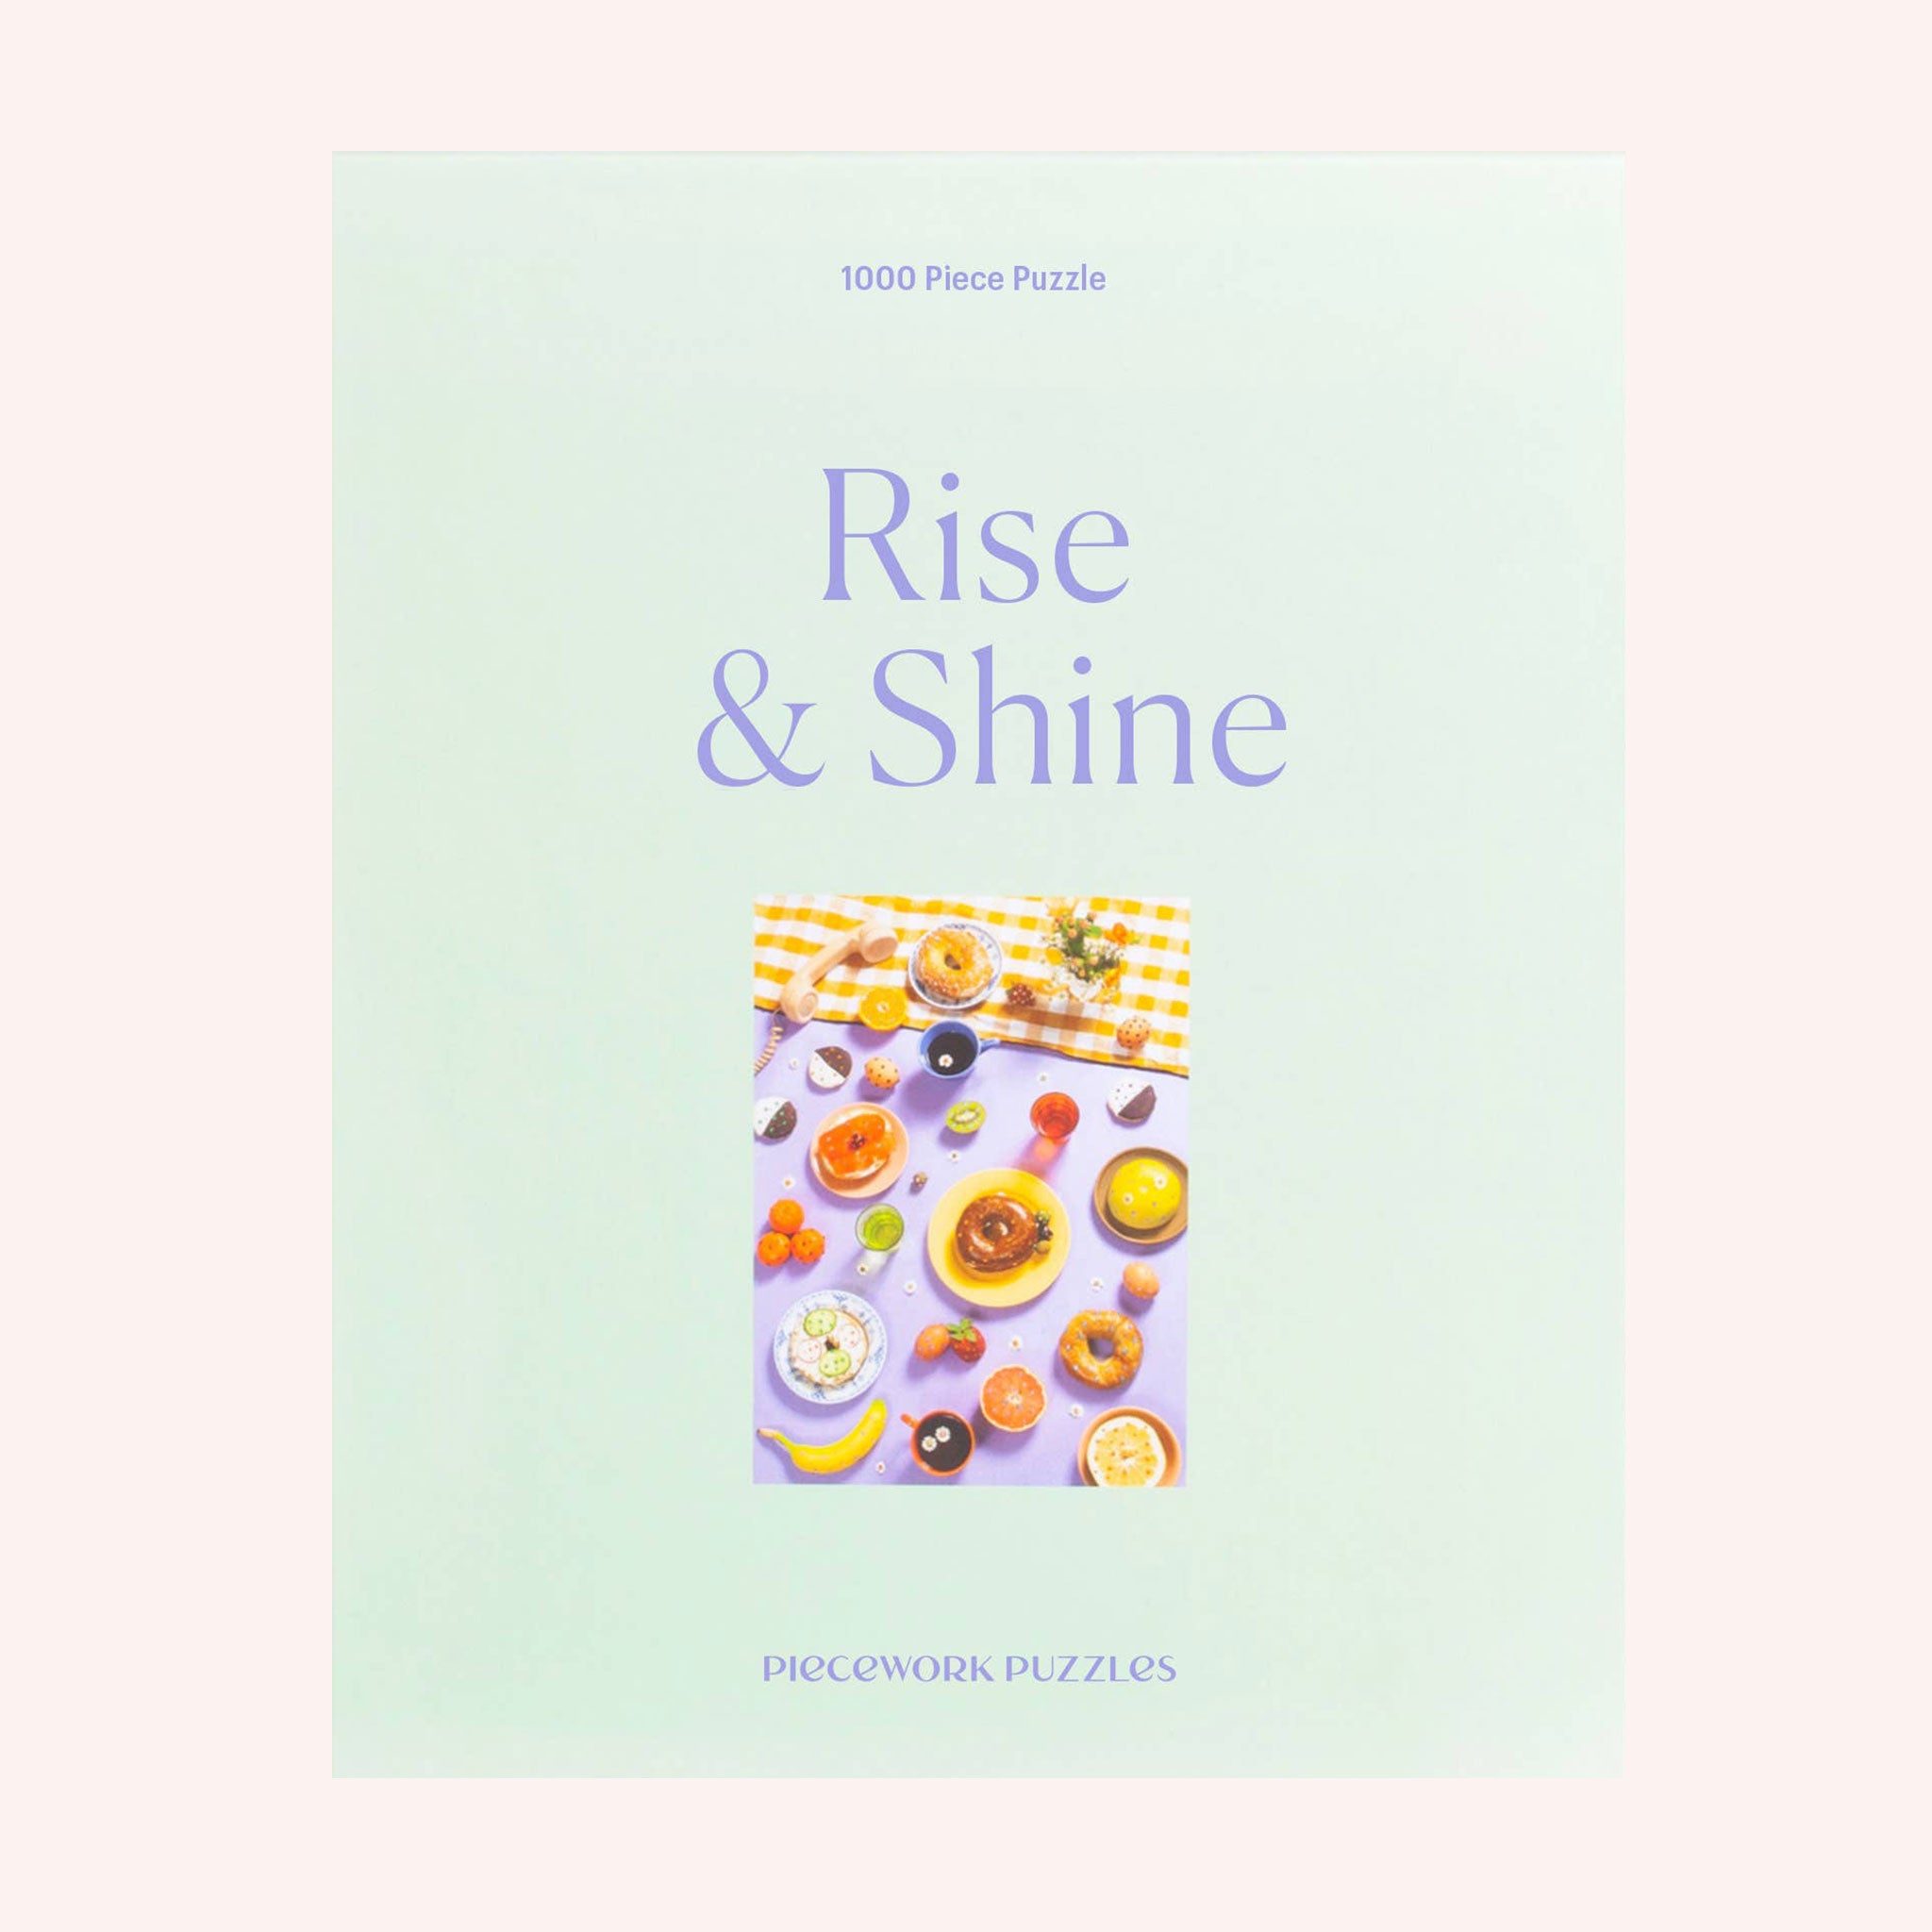 A mint green cardboard boxed puzzle with the words "Rise & Shine" in a light purple text along with an image of an array of bedazzled breakfast items including bagels, fruits, sunny side up eggs and more.